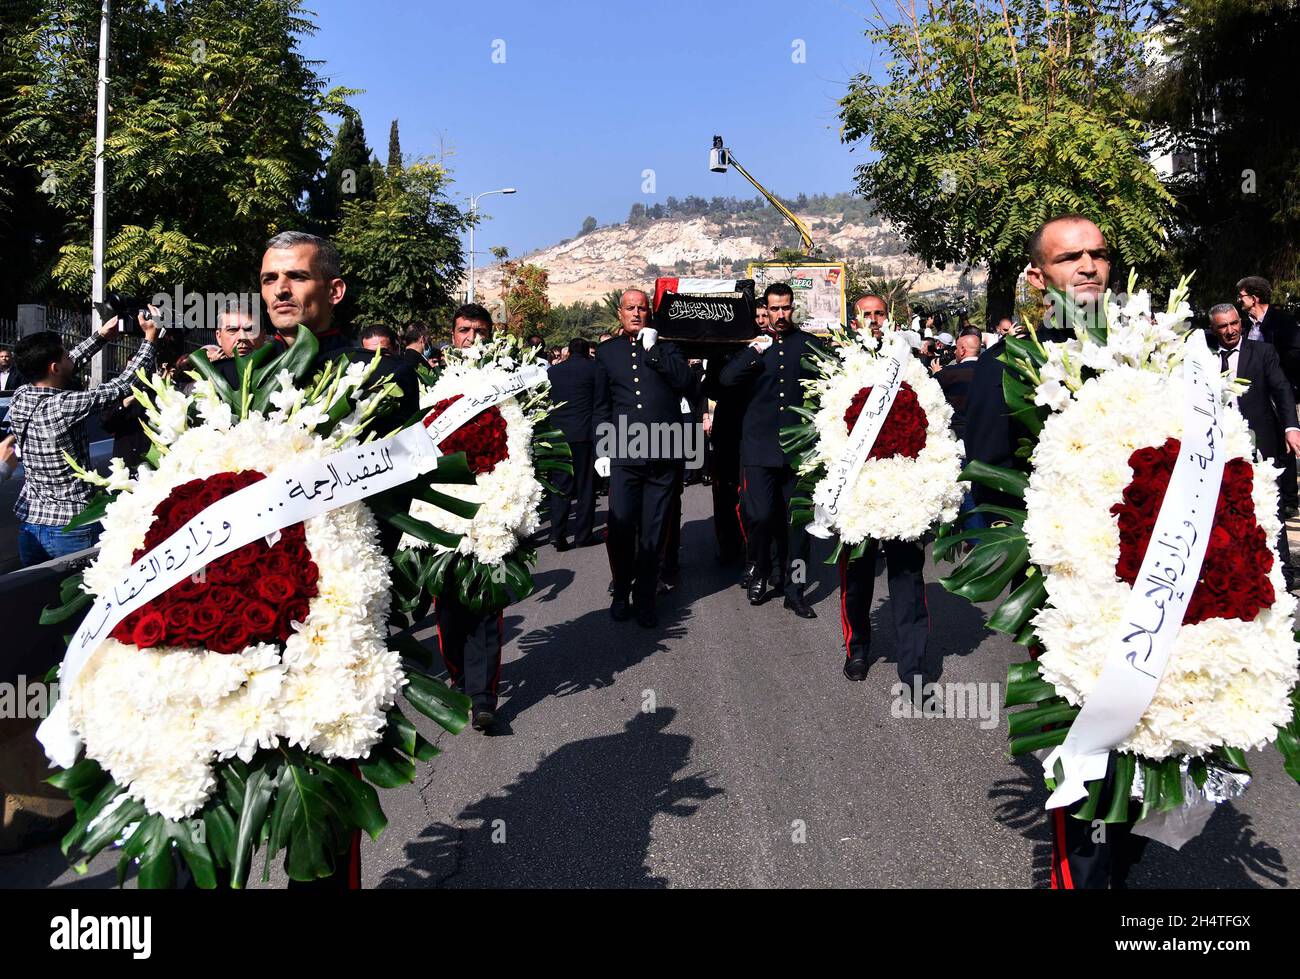 Damascus, Syria. 4th Nov, 2021. Honor guards carry the casket of late Syrian singer Sabah Fakhri during his funeral procession in Damascus, Syria, on Nov. 4, 2021. Fakhri, an iconic tenor singer from Syria's northern province Aleppo, died on Tuesday at the age of 88 at a hospital in the capital Damascus. Credit: Ammar Safarjalani/Xinhua/Alamy Live News Stock Photo